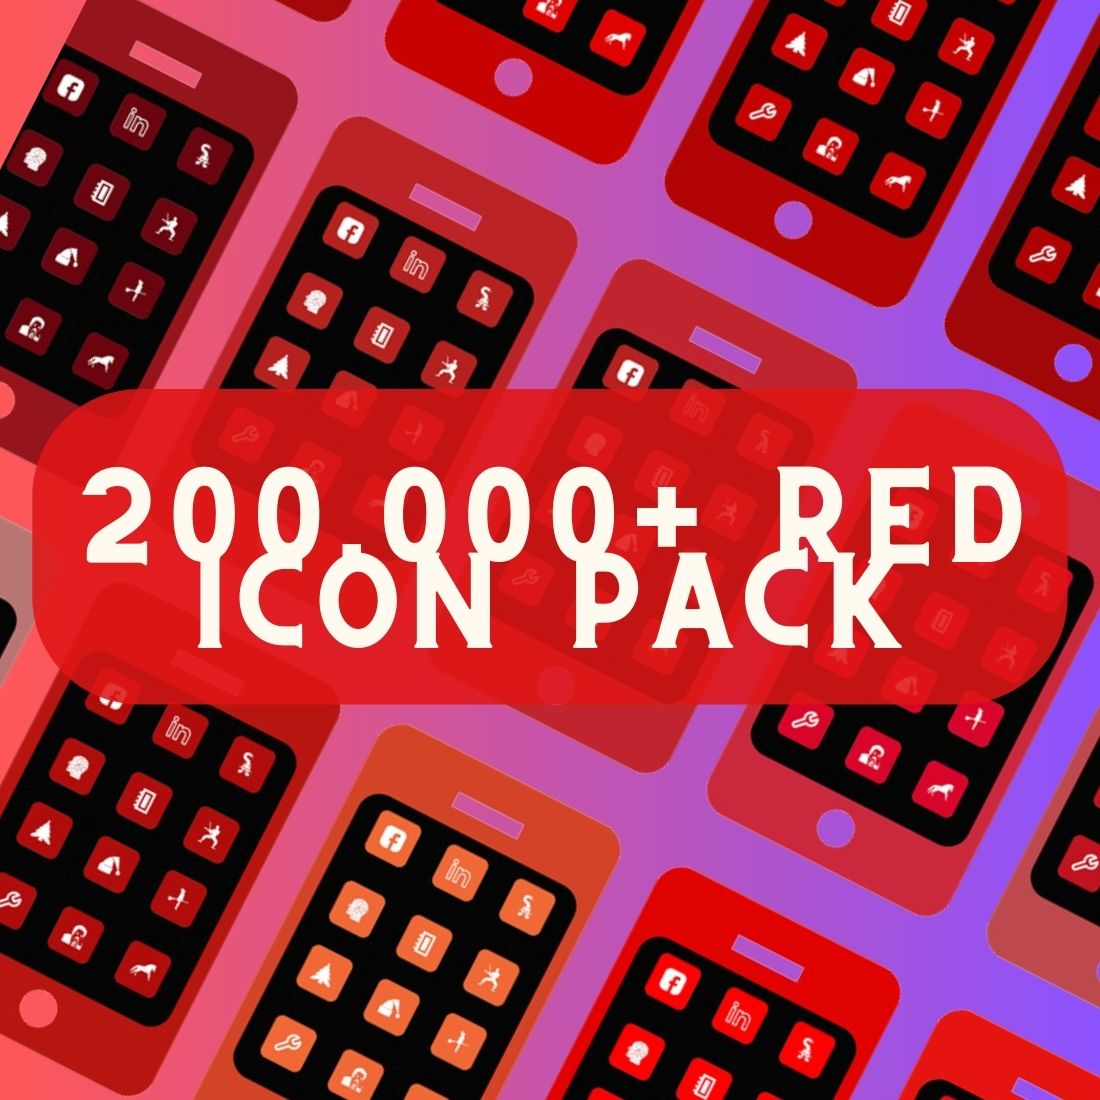 RED ICONS PACK cover image.